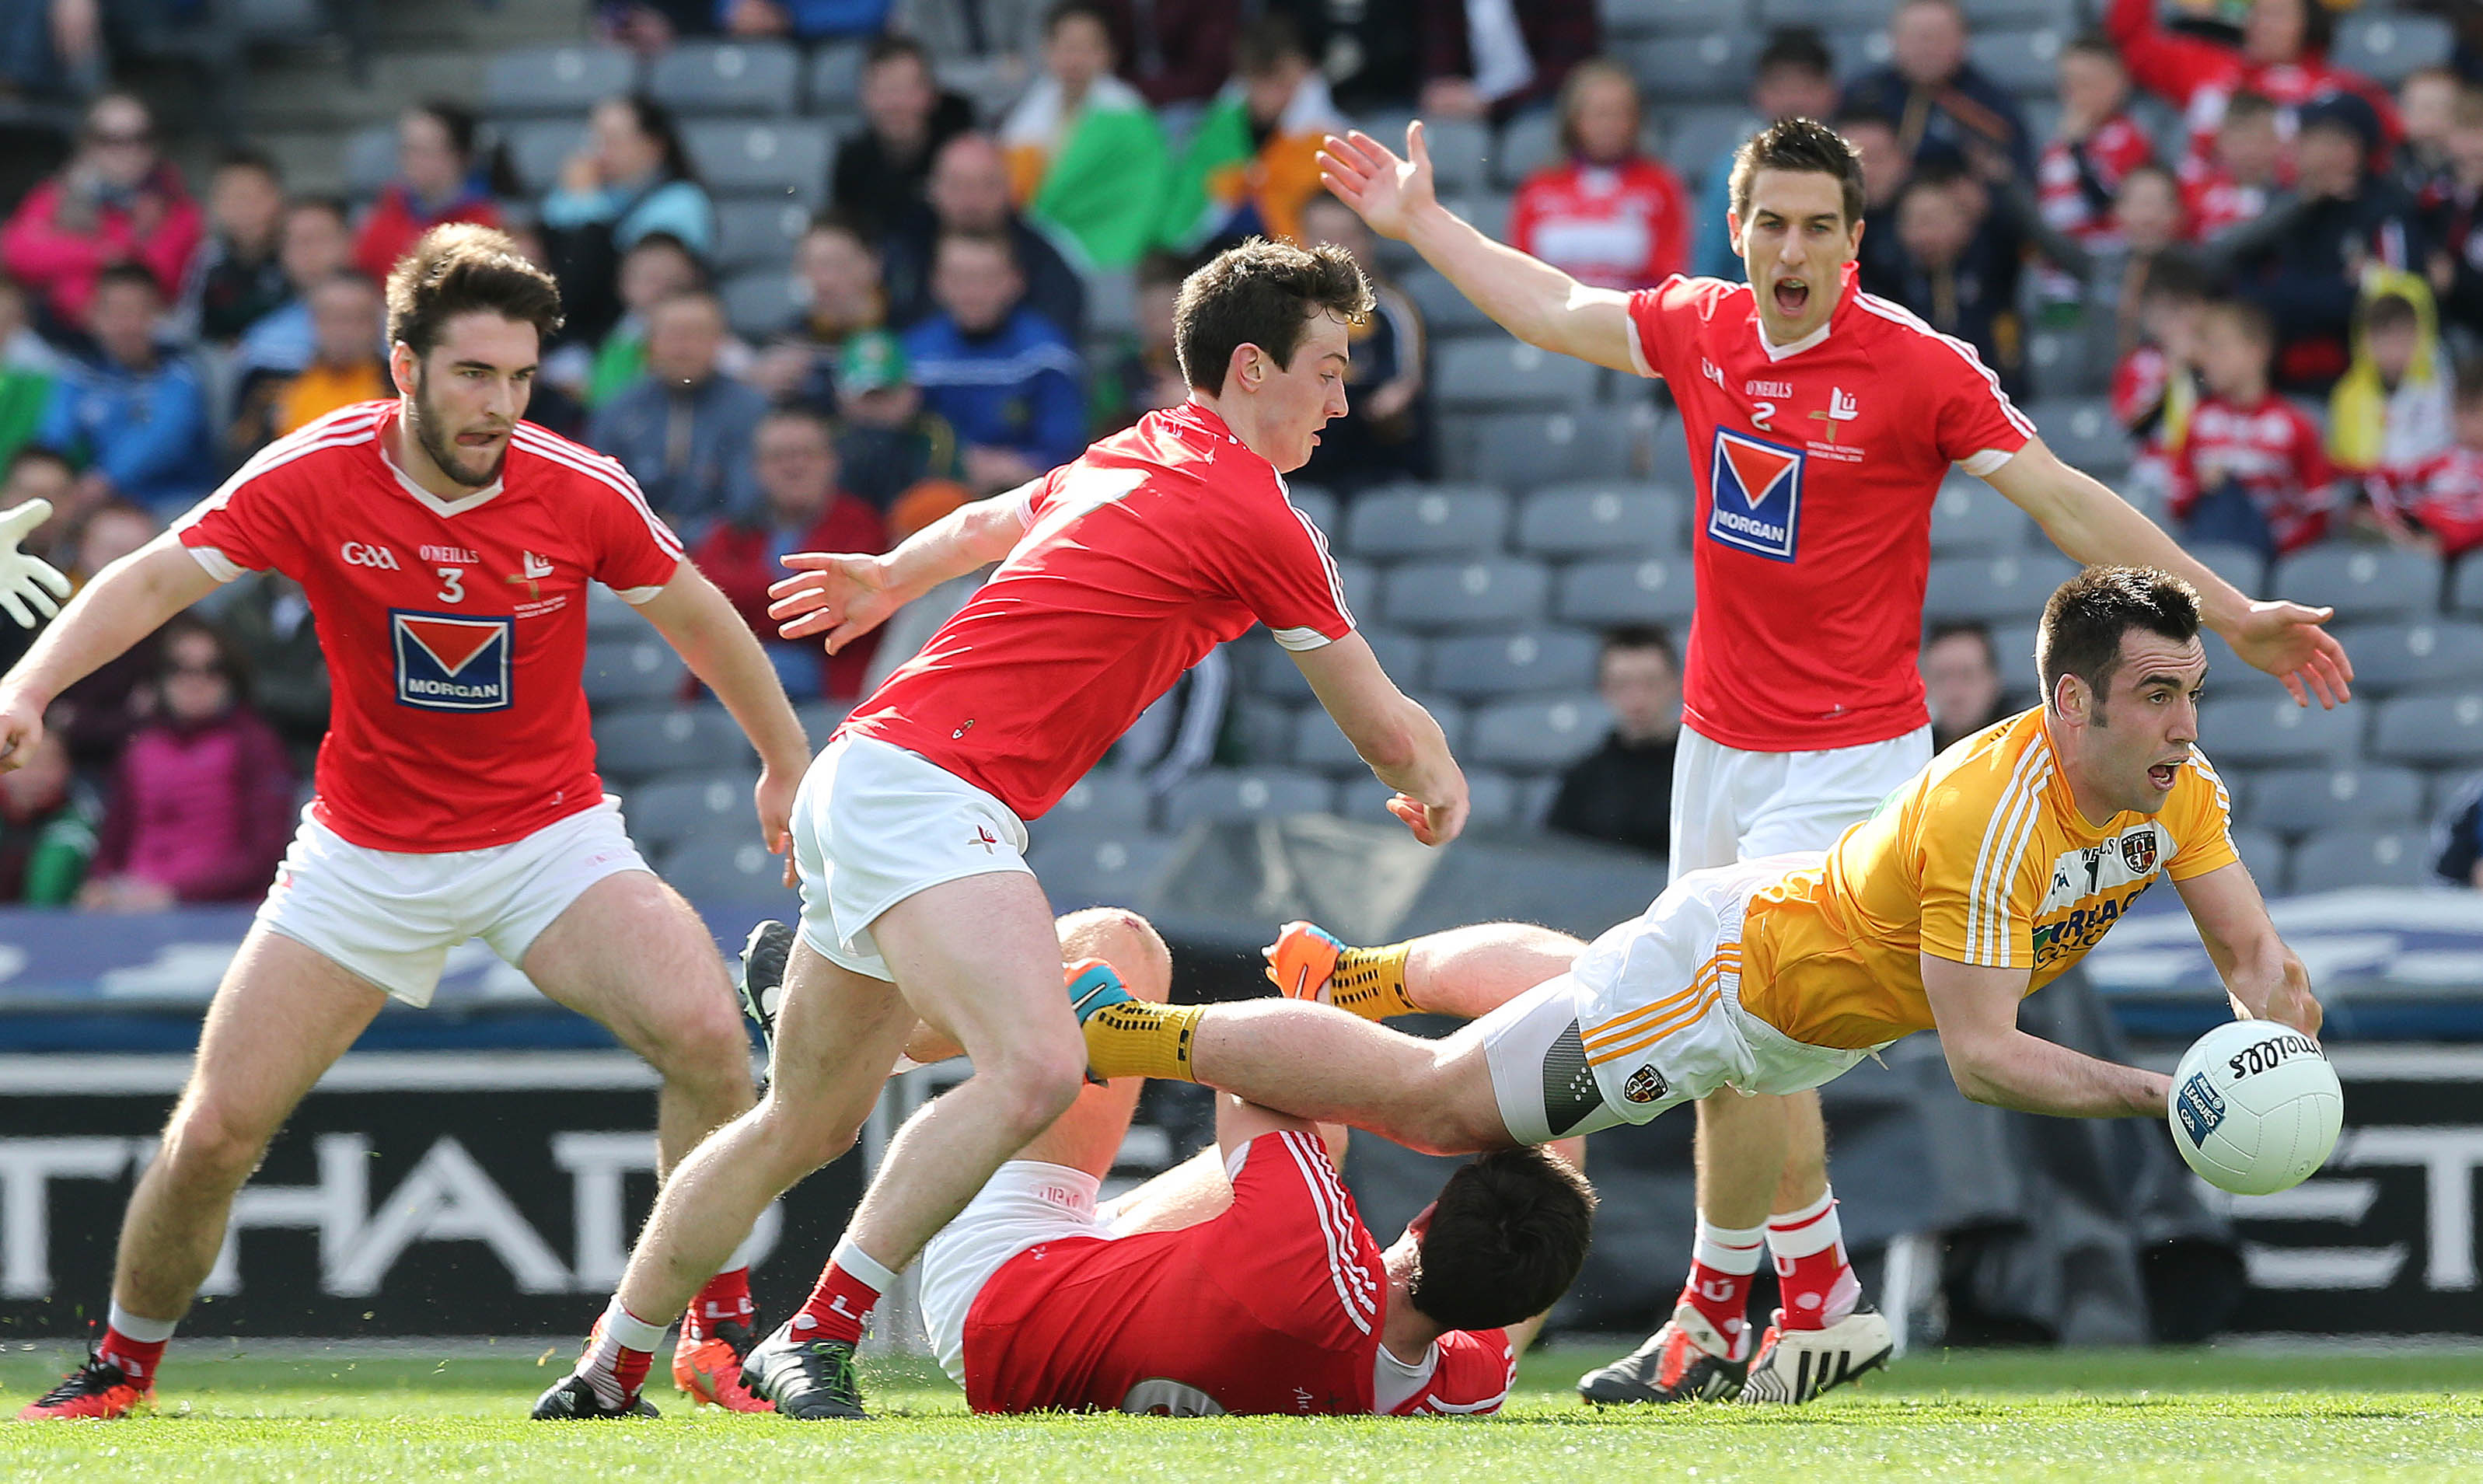 Antrim’s Kevin Niblock gets the ball away under pressure during Saturday’s Division Four final defeat to Louth at Croke Park